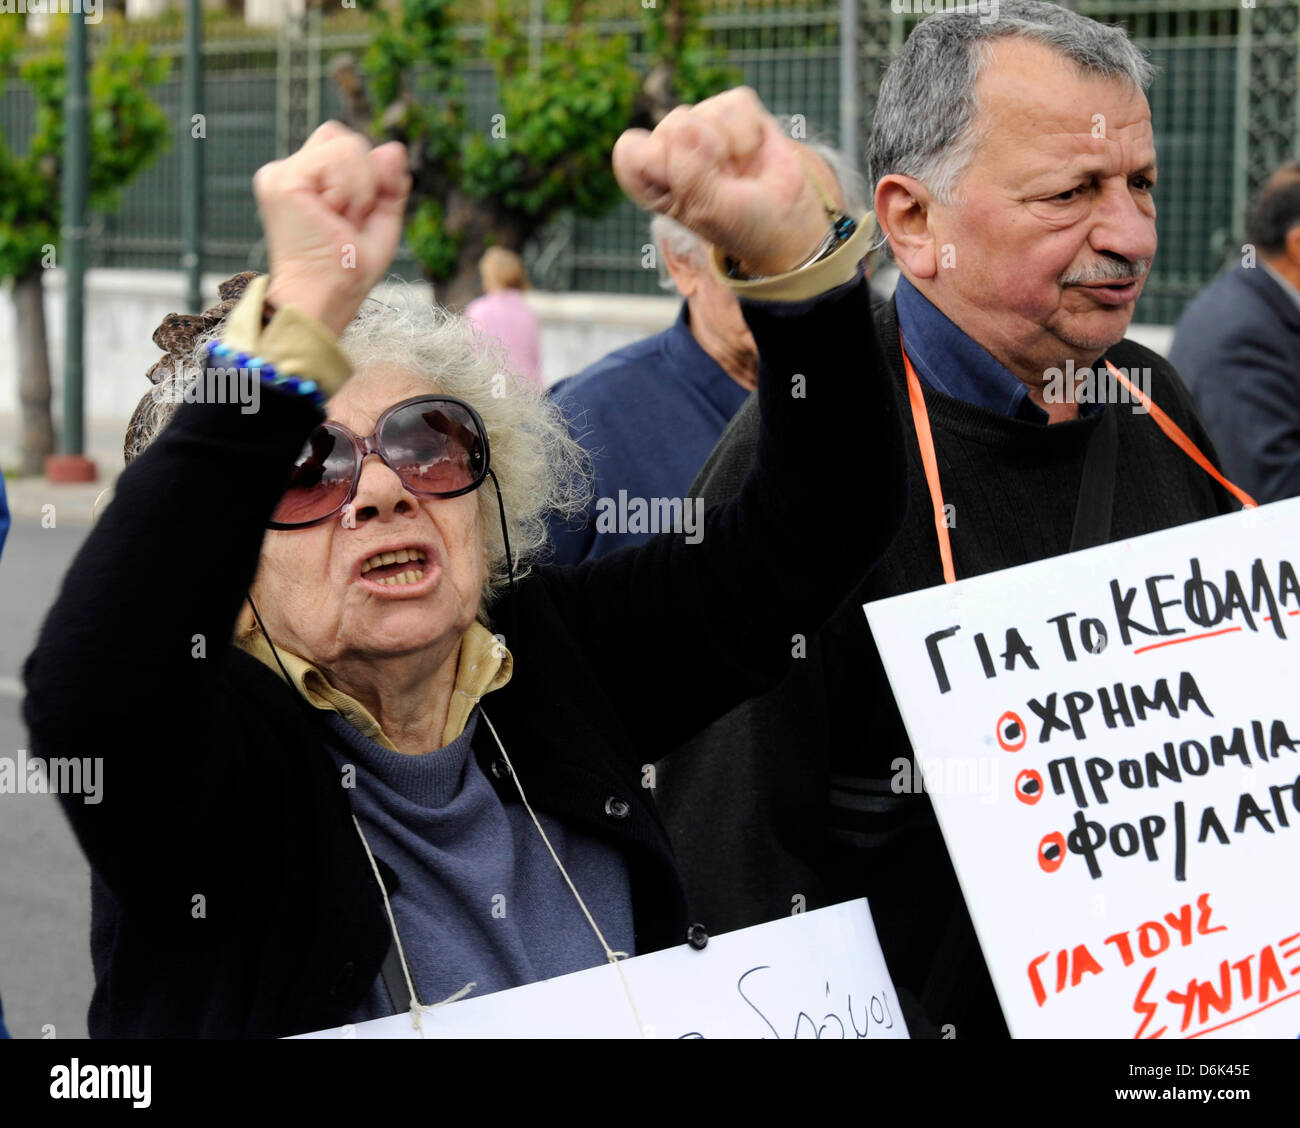 Athens, Greece. 19th April 2013. Pensioners shout slogans during a protest march in Athens. About 2,000 pensioners marched to Villa Maximos, the official residence of the Prime Minister of Greece to protest against cuts in pensions with rising taxes. Photo: Giorgos Nikolaidis/Art of Focus/Alamy Live News Stock Photo